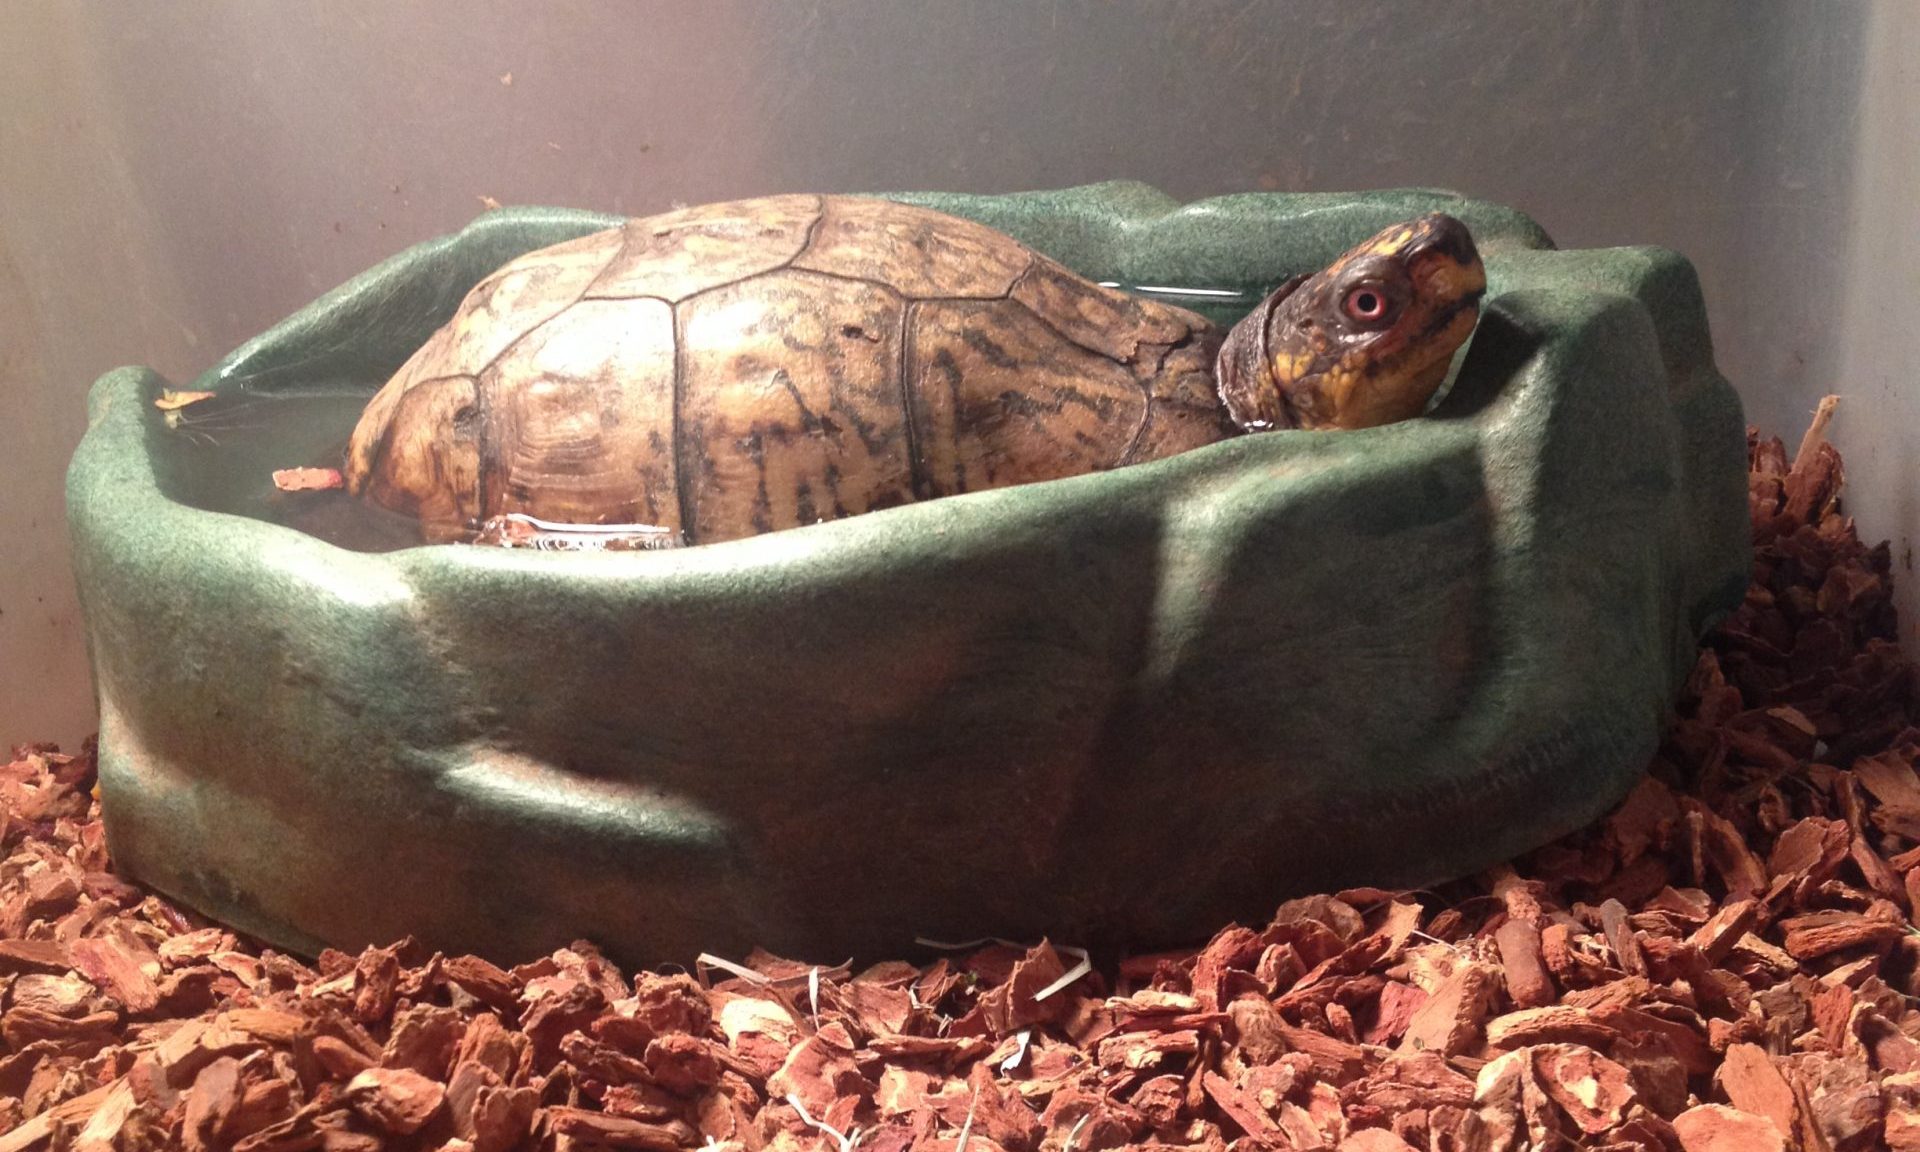 Is It Illegal to Keep a Box Turtle? 2